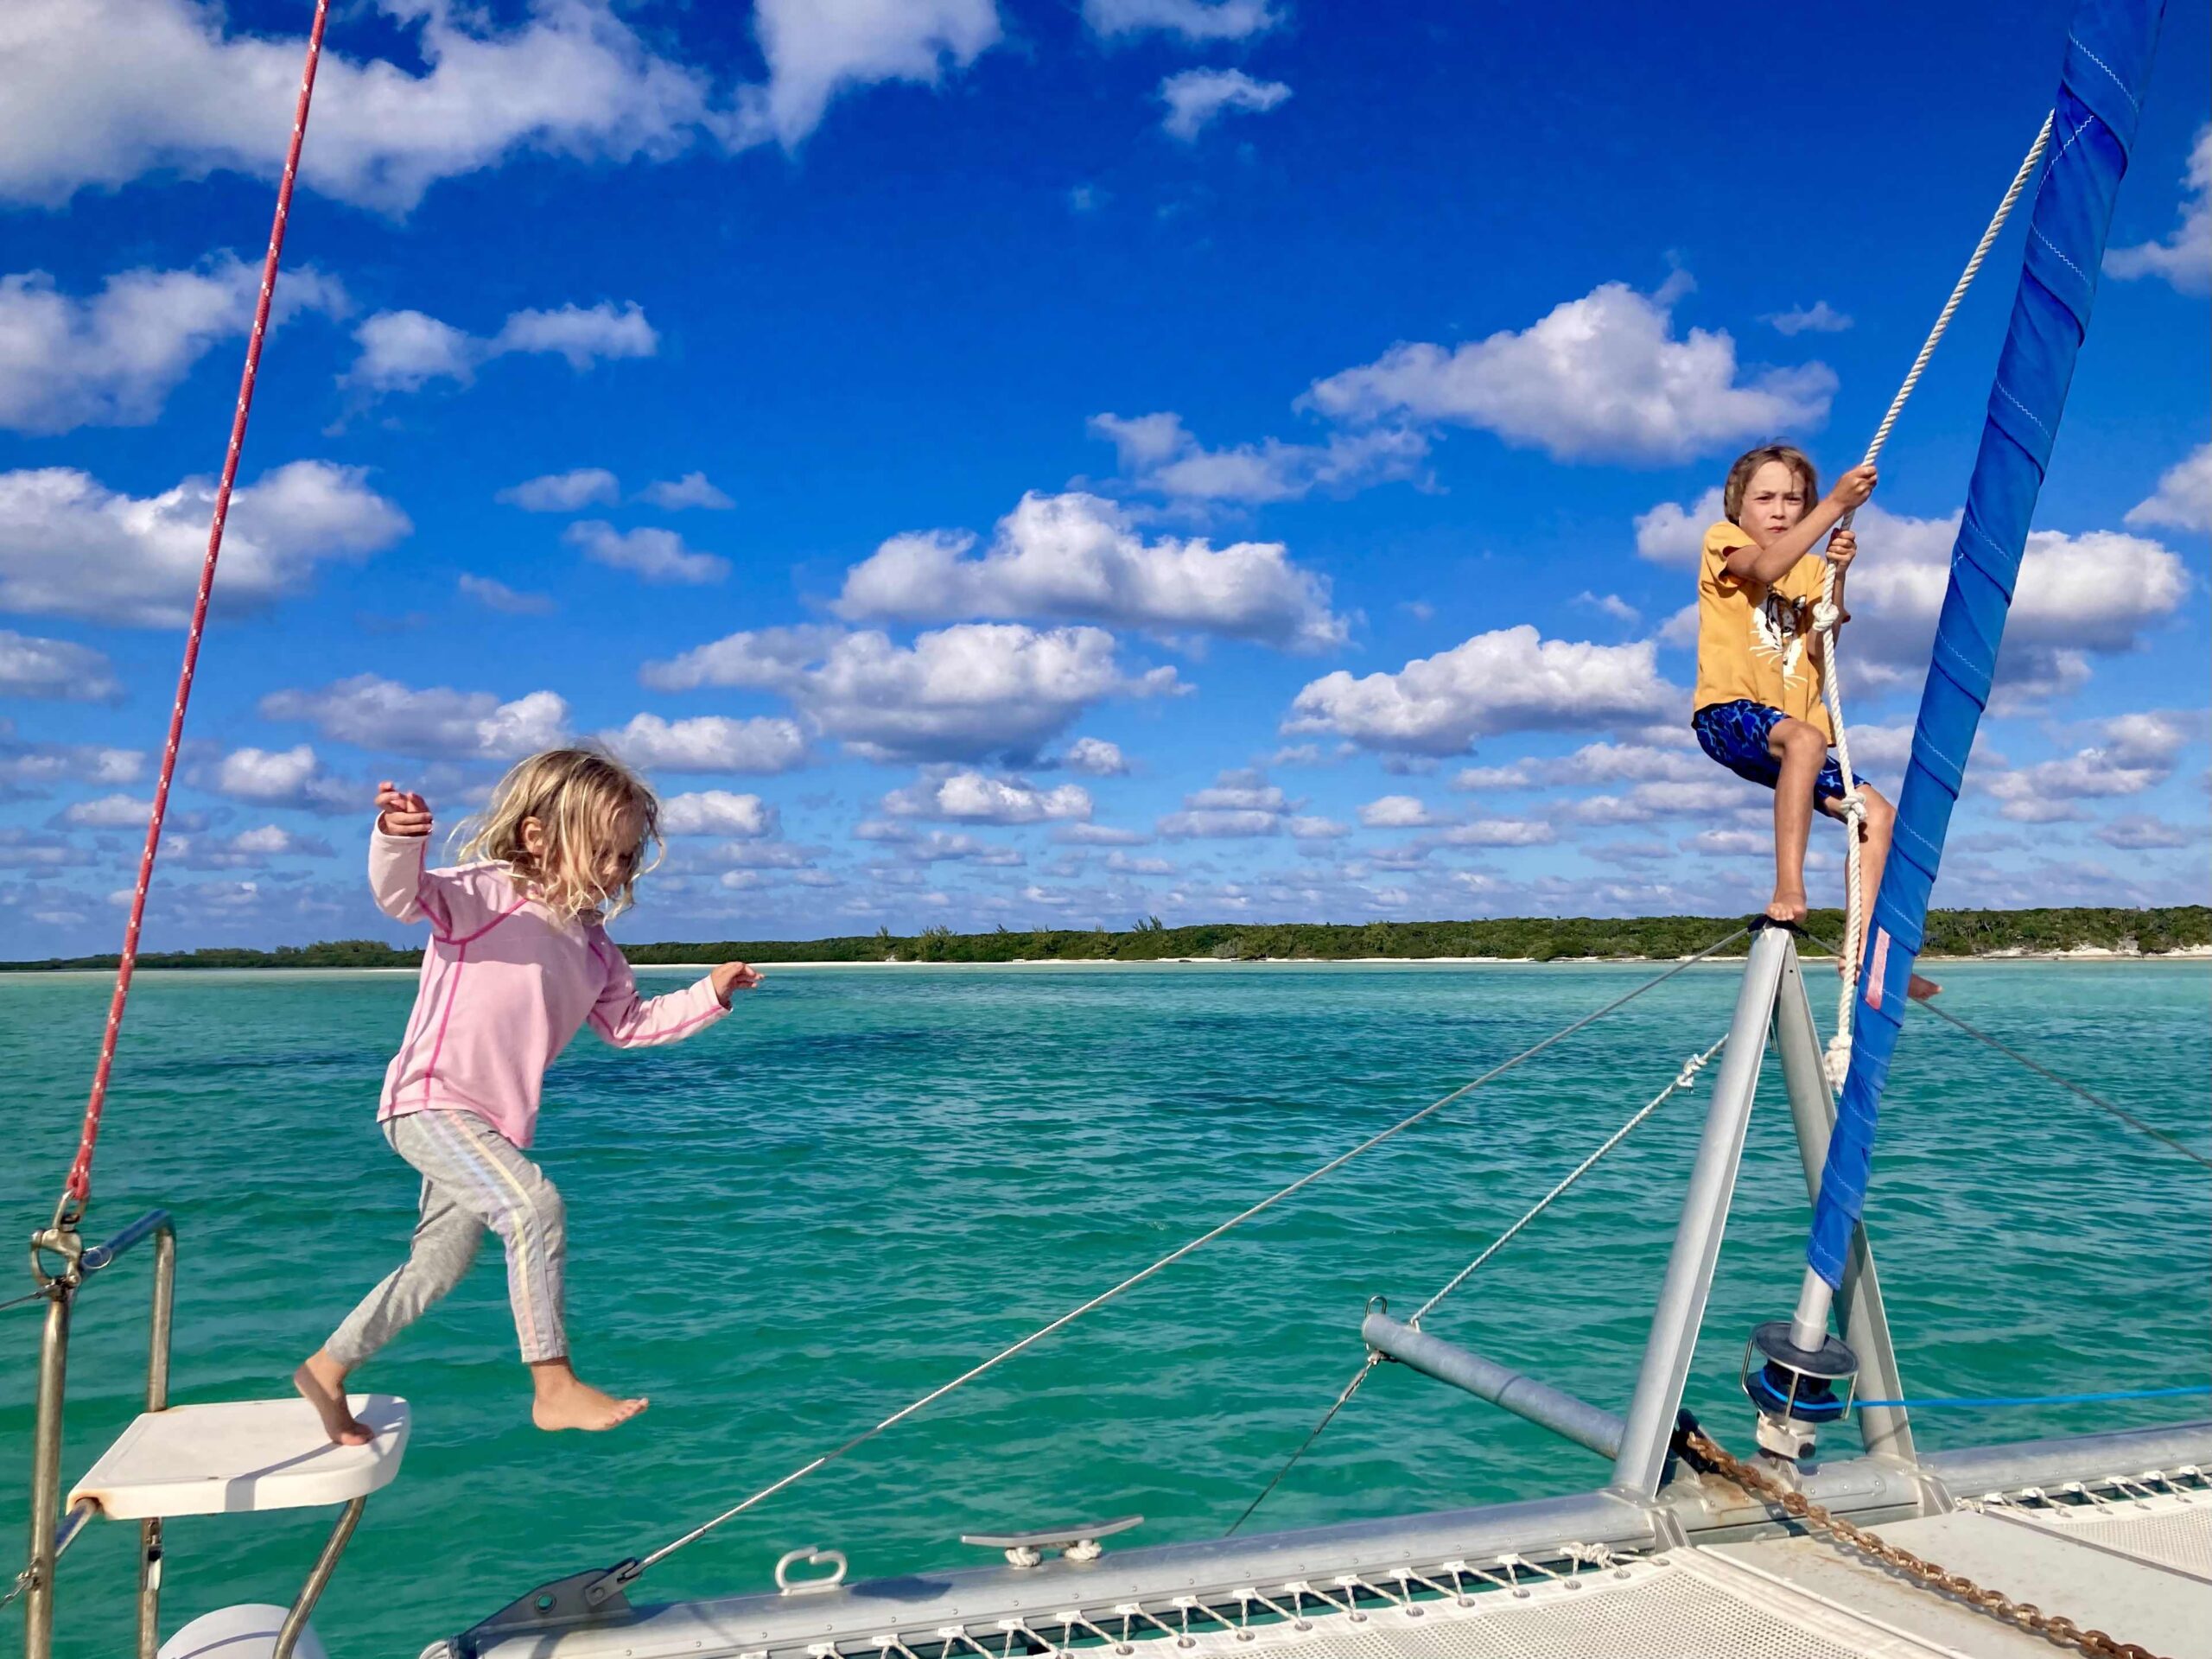 Sailing in the Bahamas with kids is a blast!